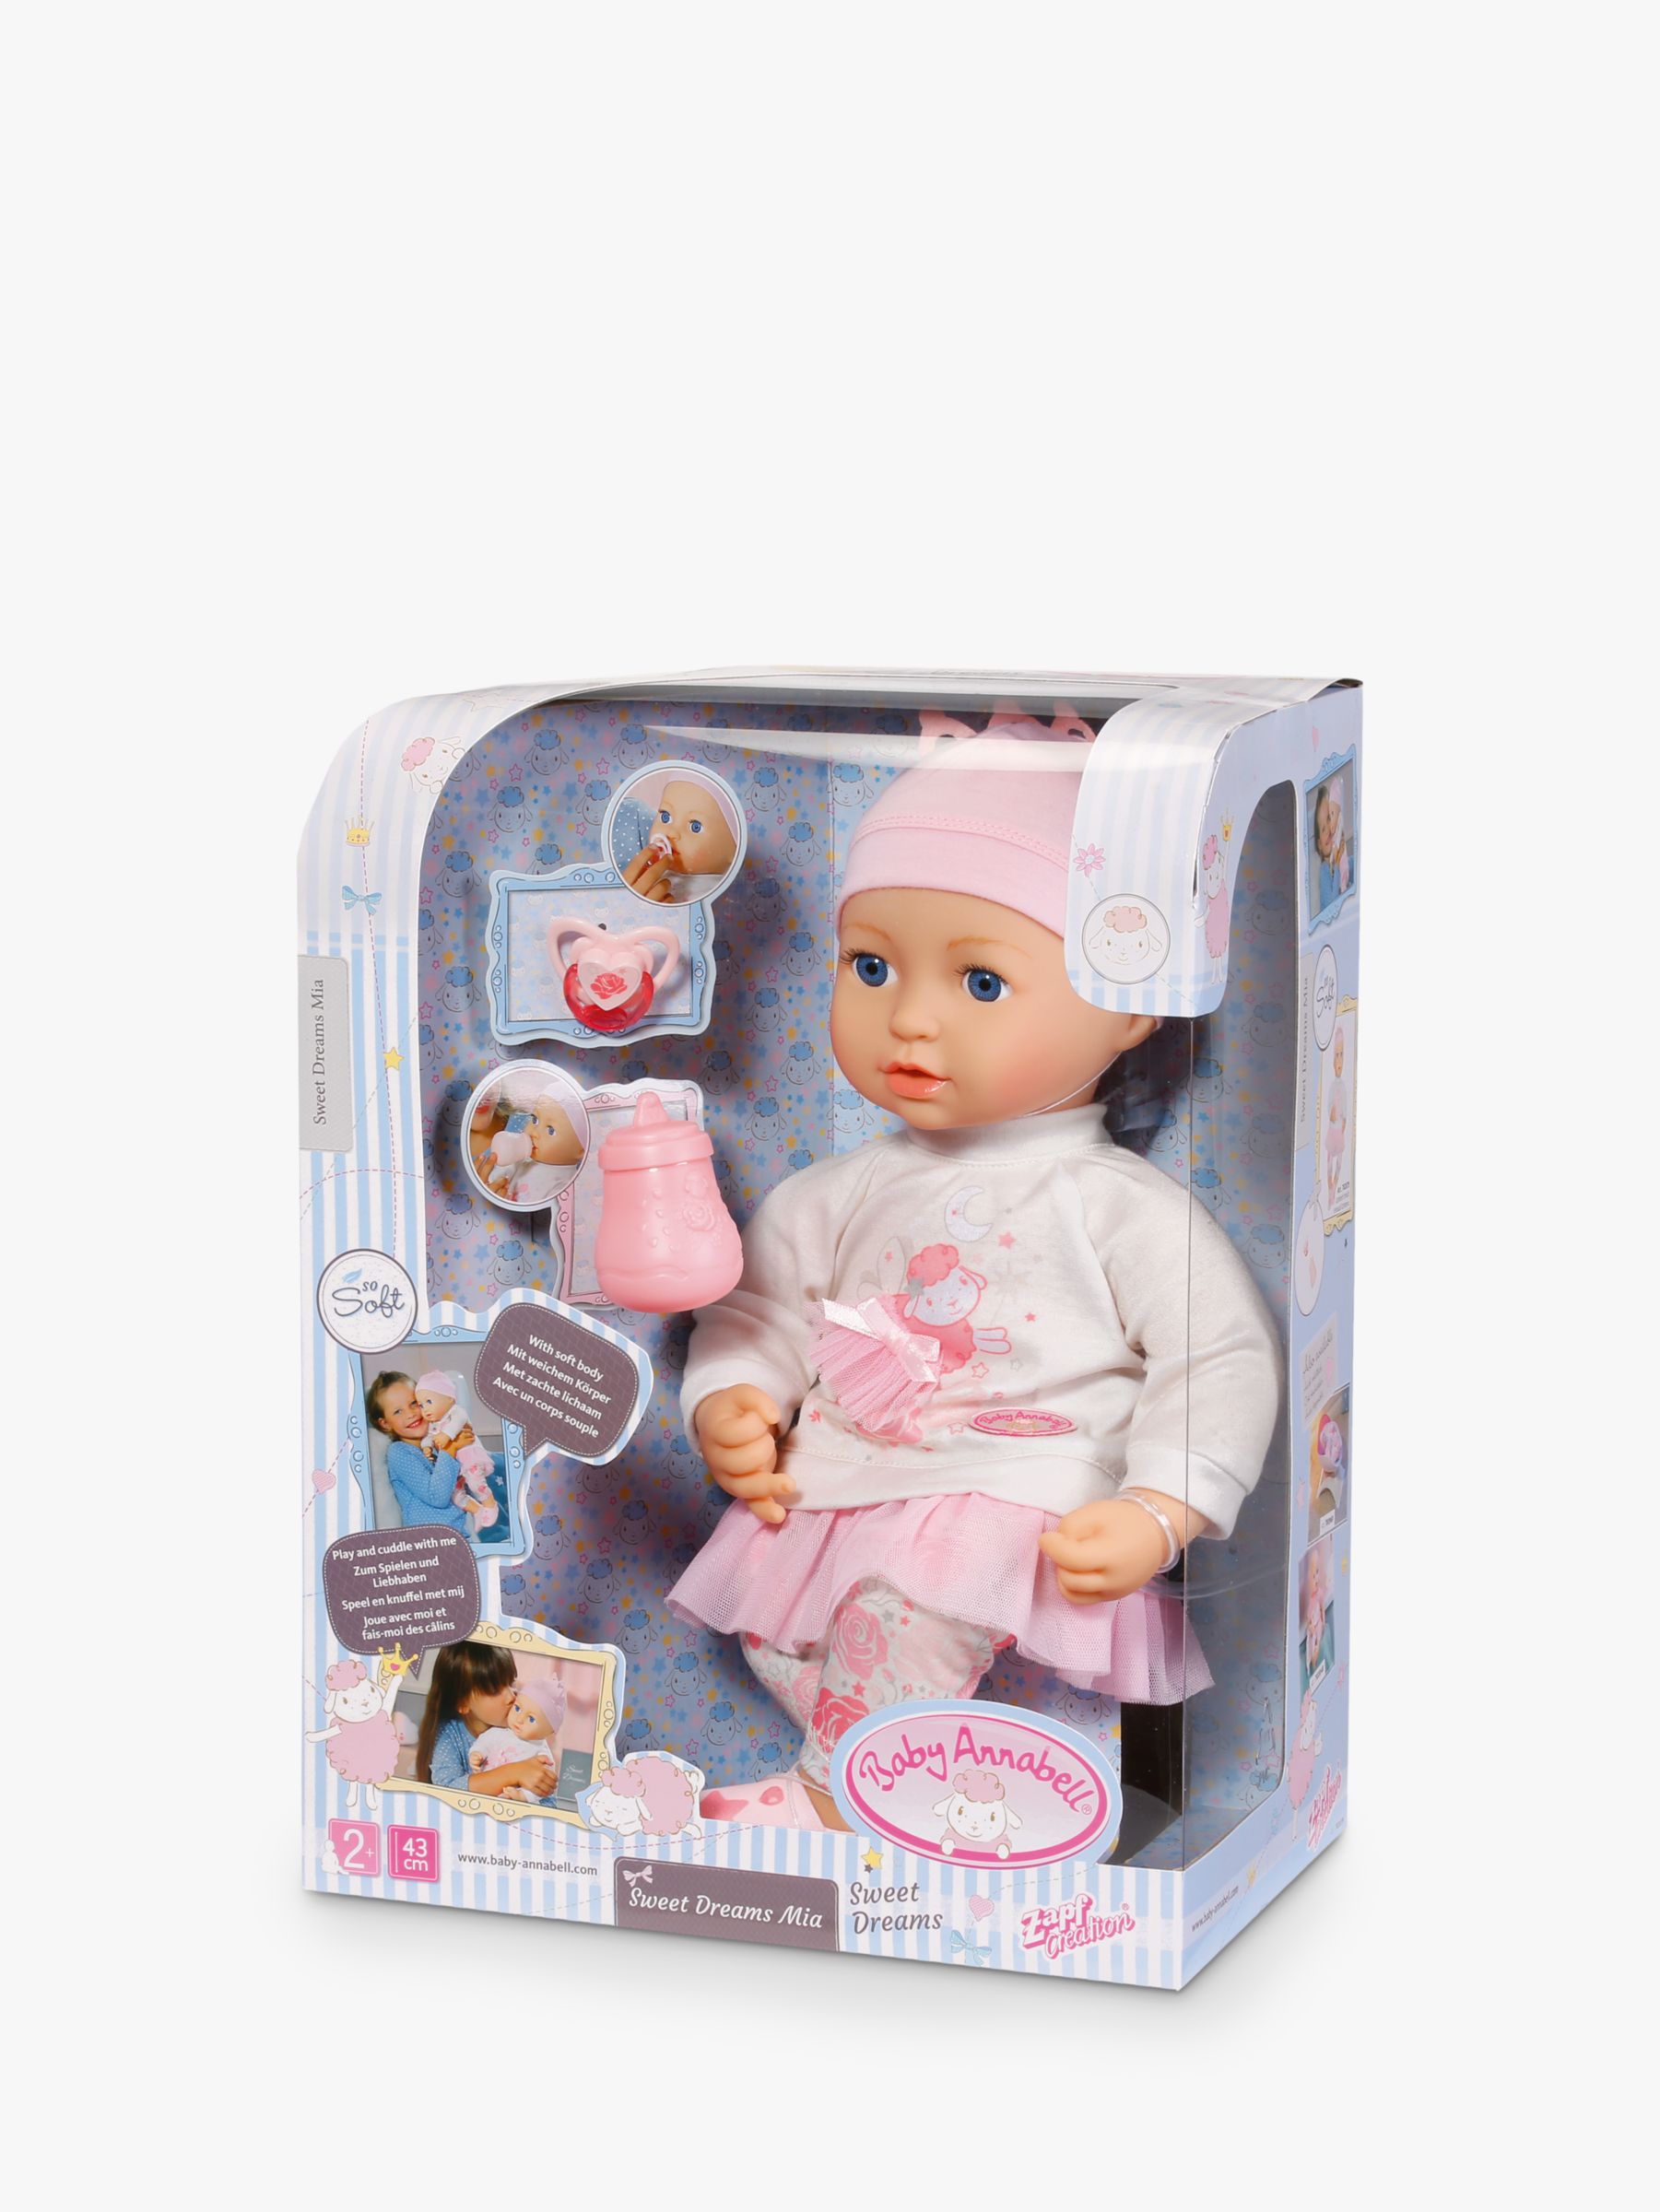 baby annabell sweet dreams bed